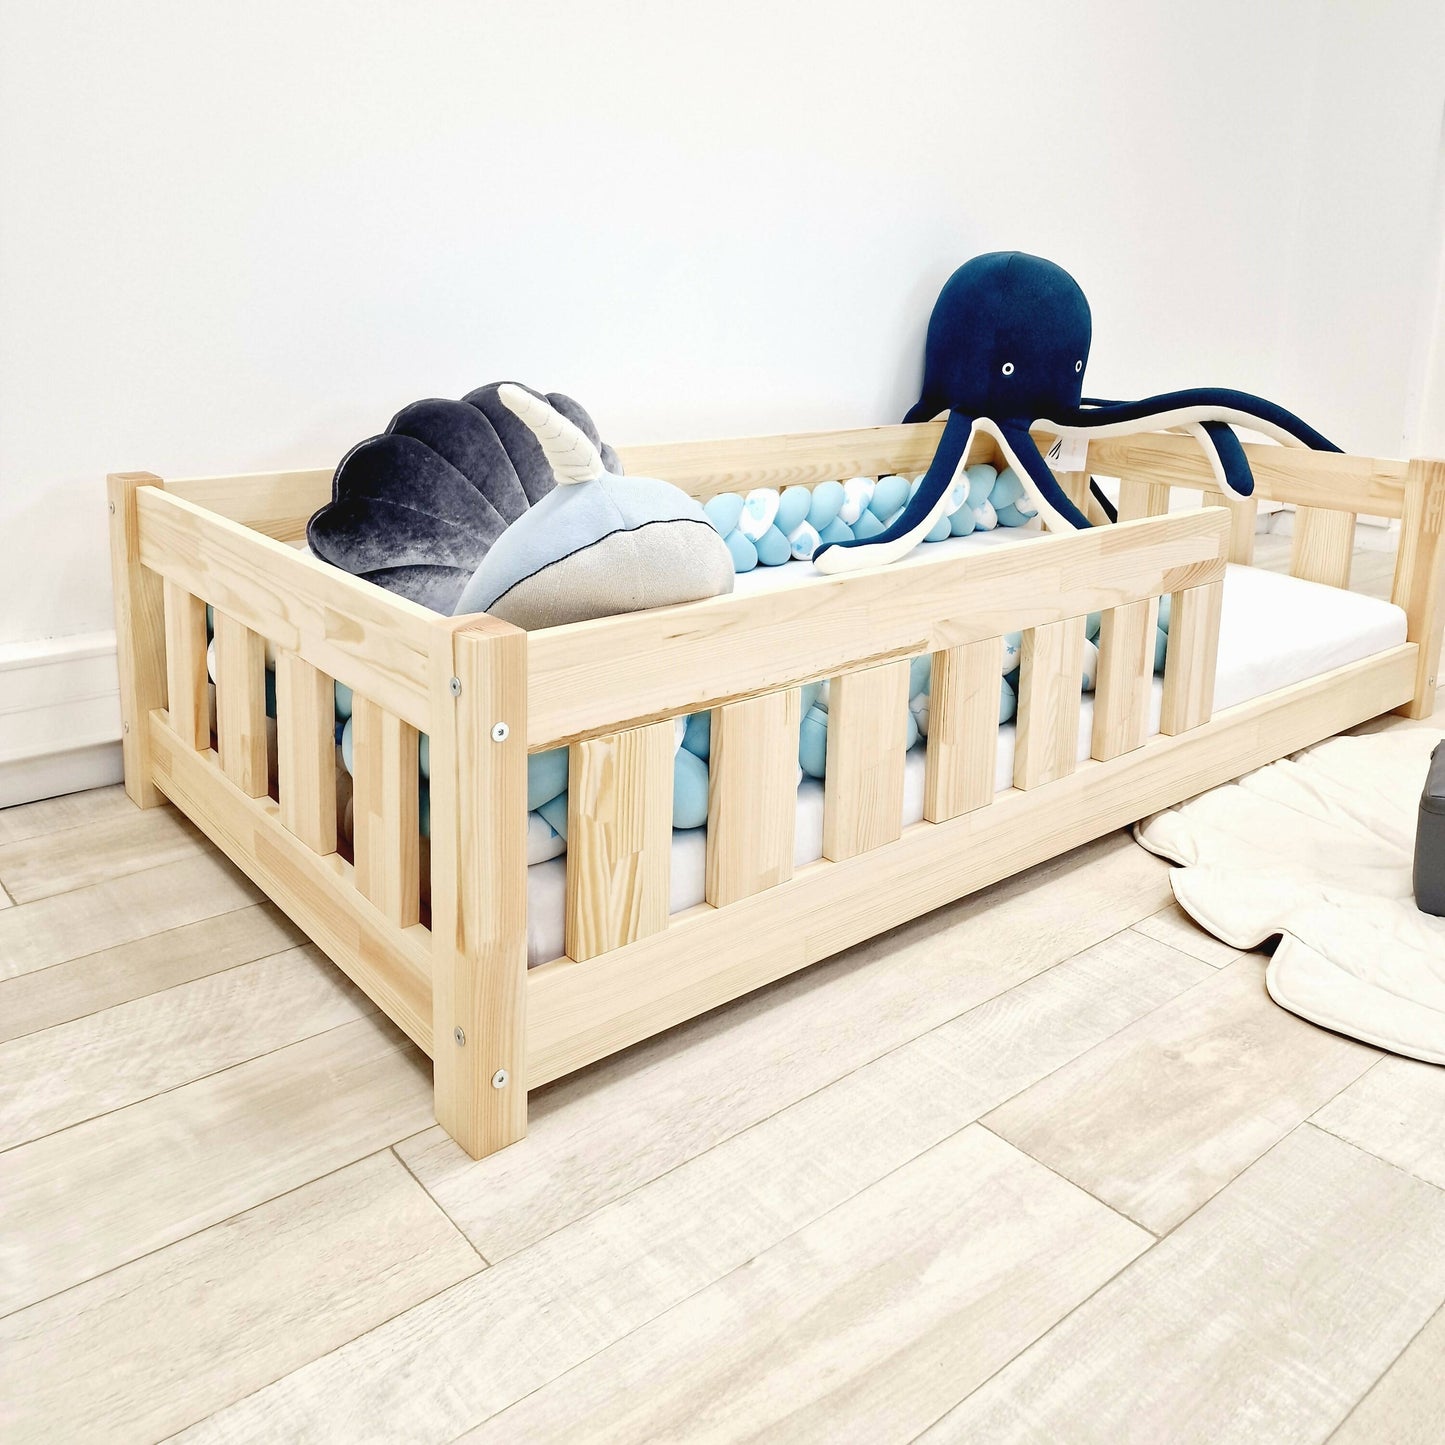 Simple children's bed with bars